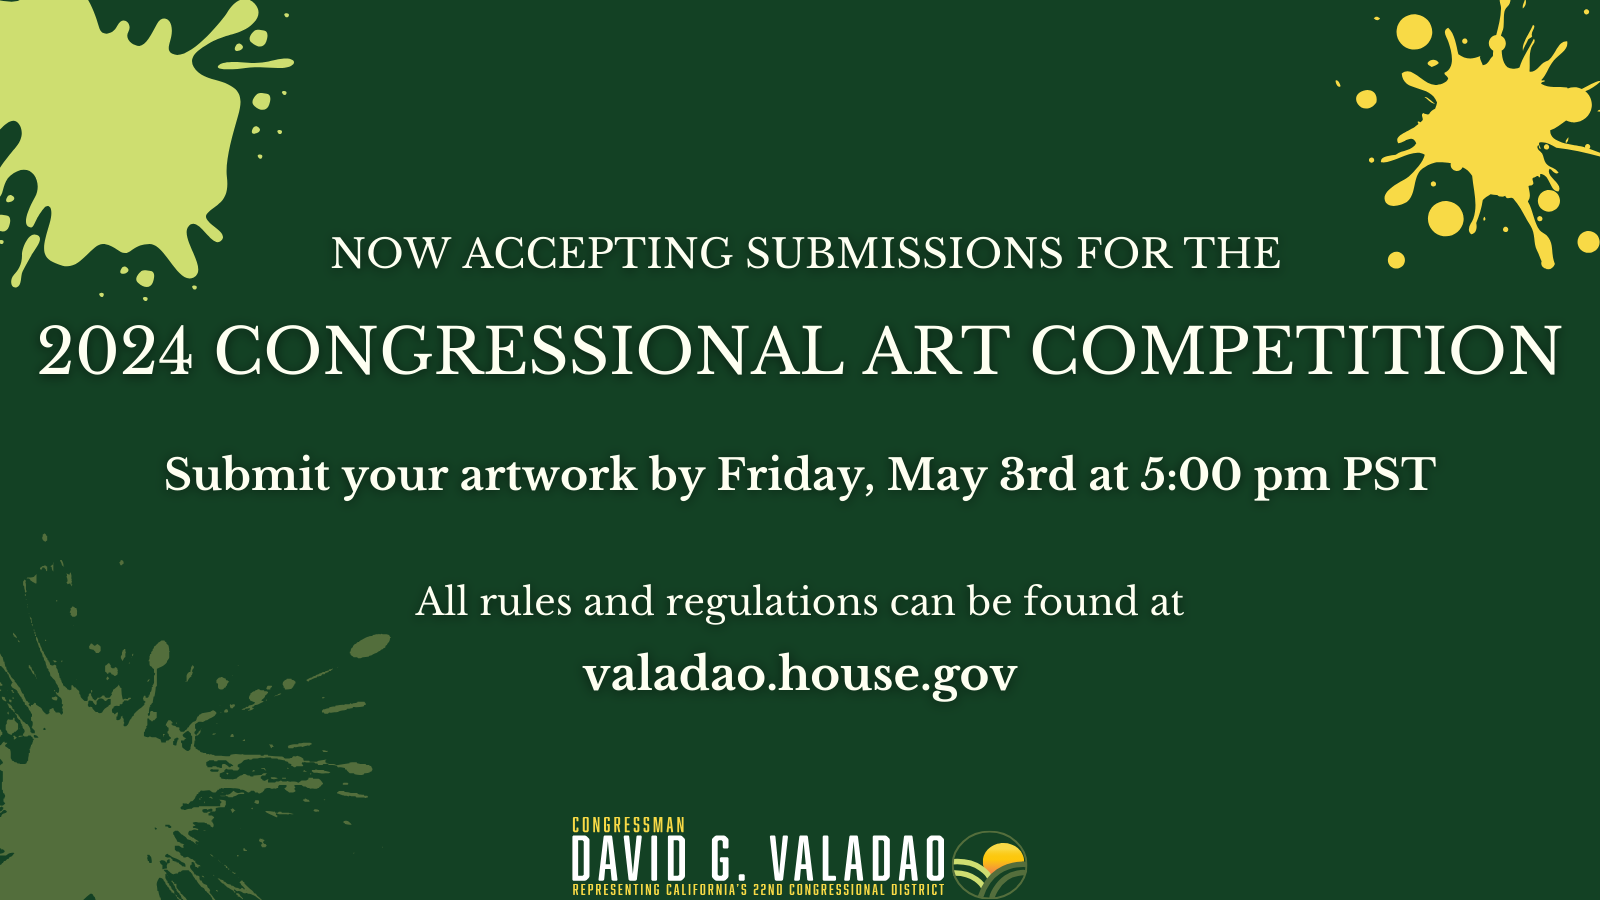 Now Accepting Submissions for the Congressional Art Competition